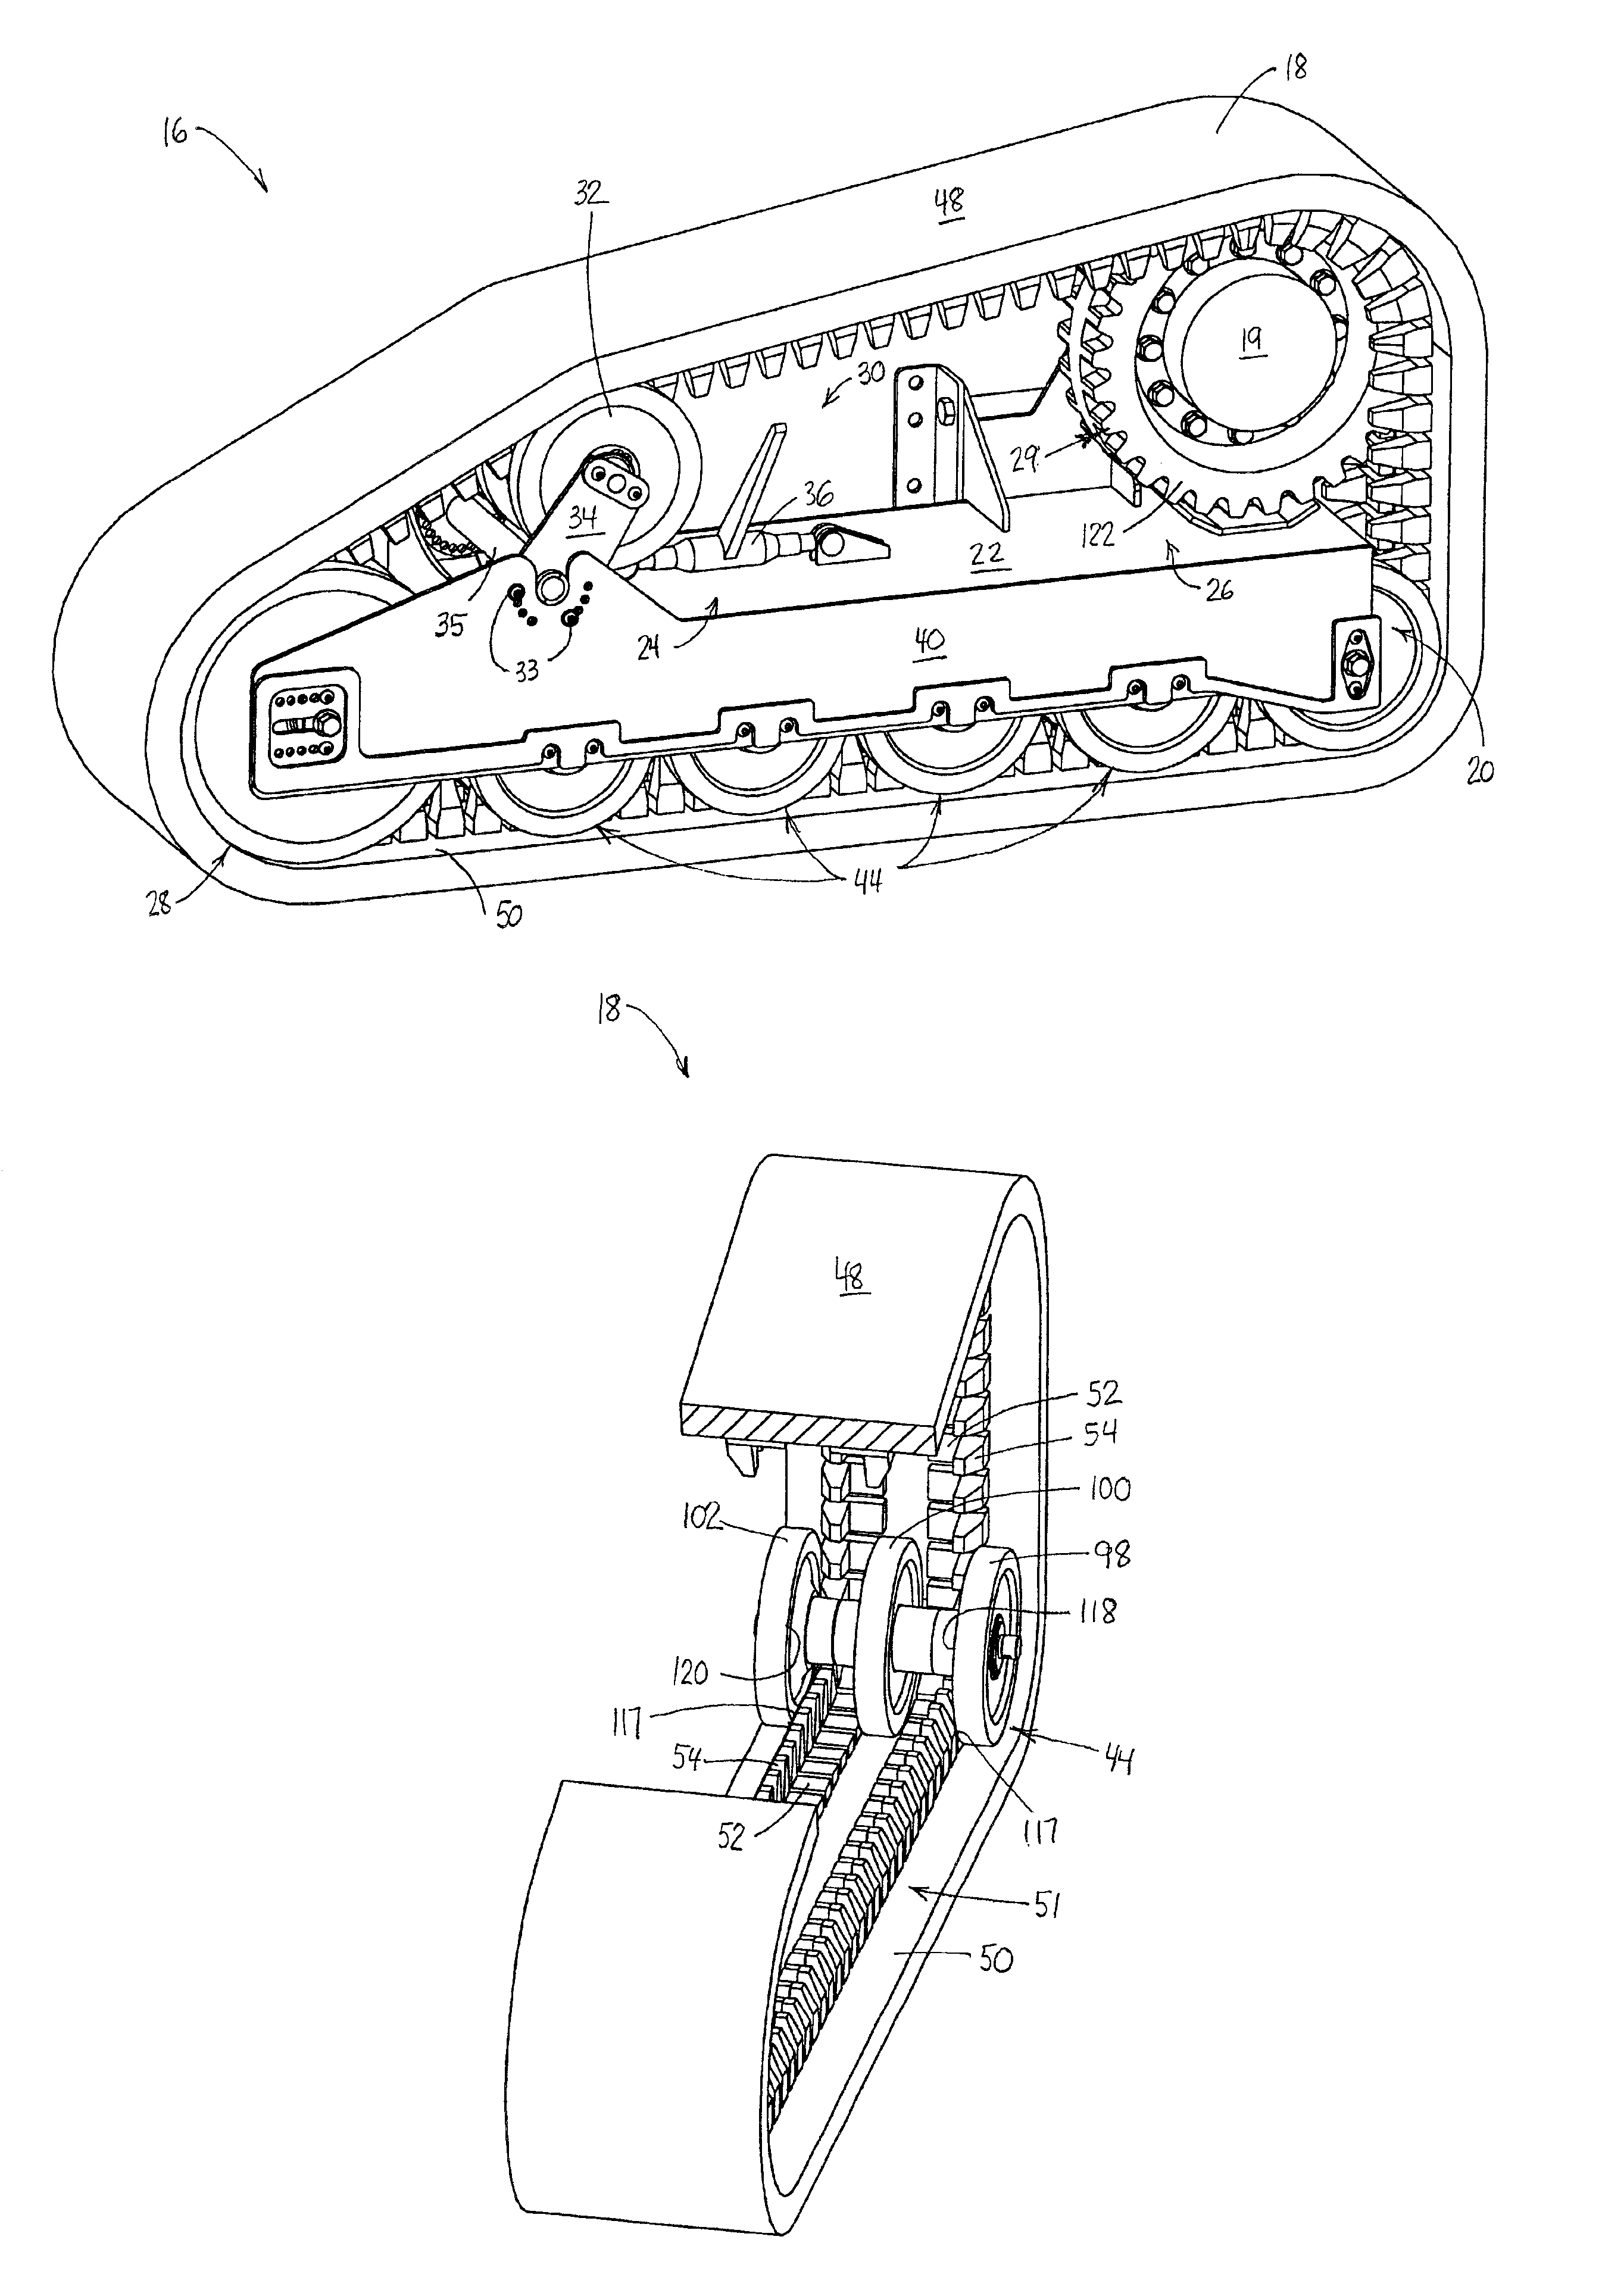 Track and track assembly for a track laying vehicle